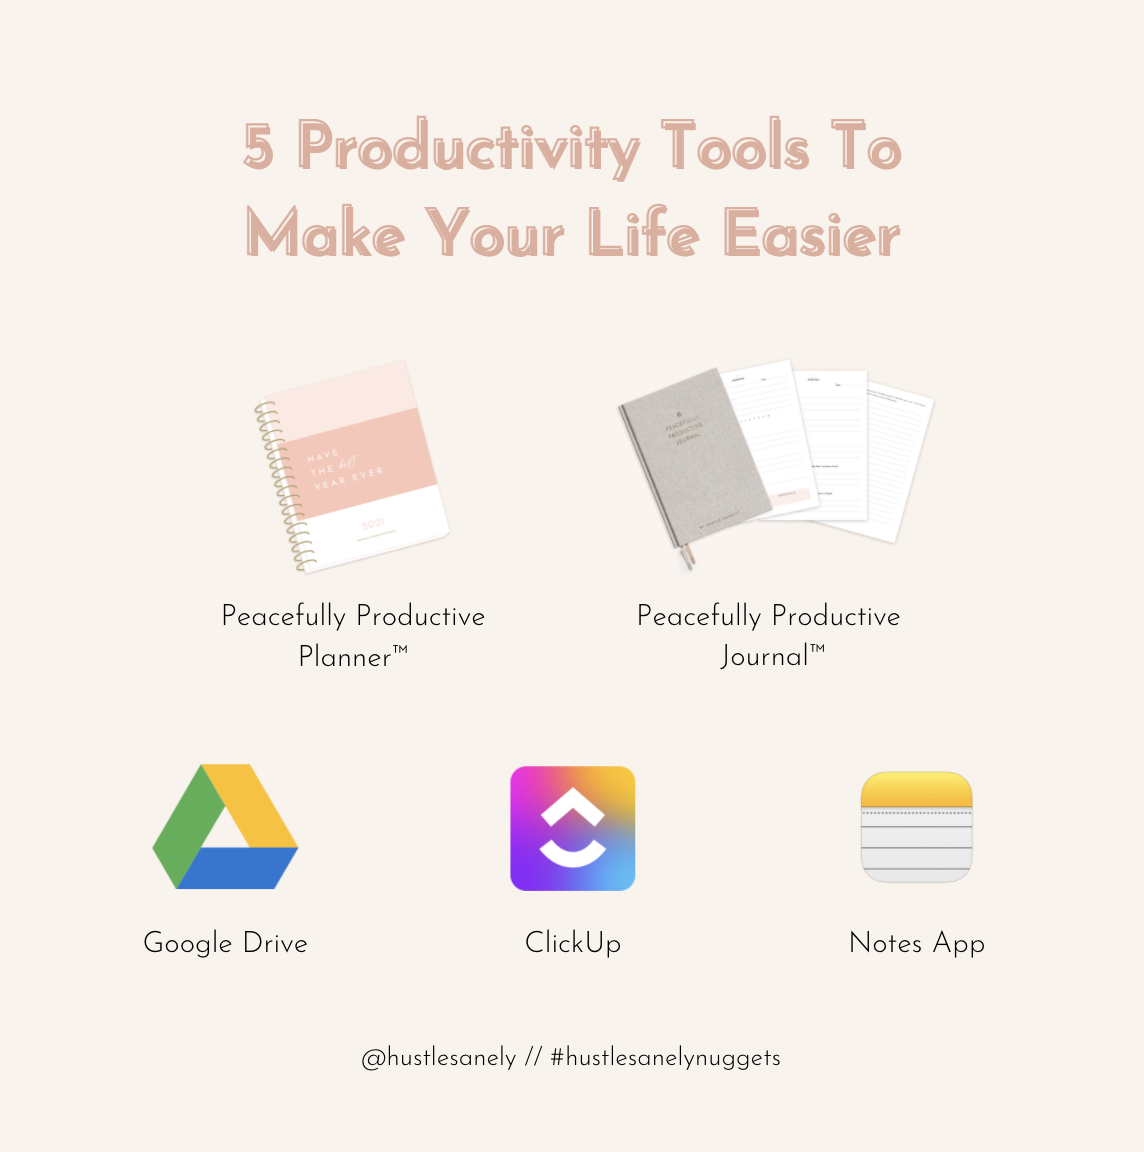 17 Free Online Tools to Make Your Work Life Easier